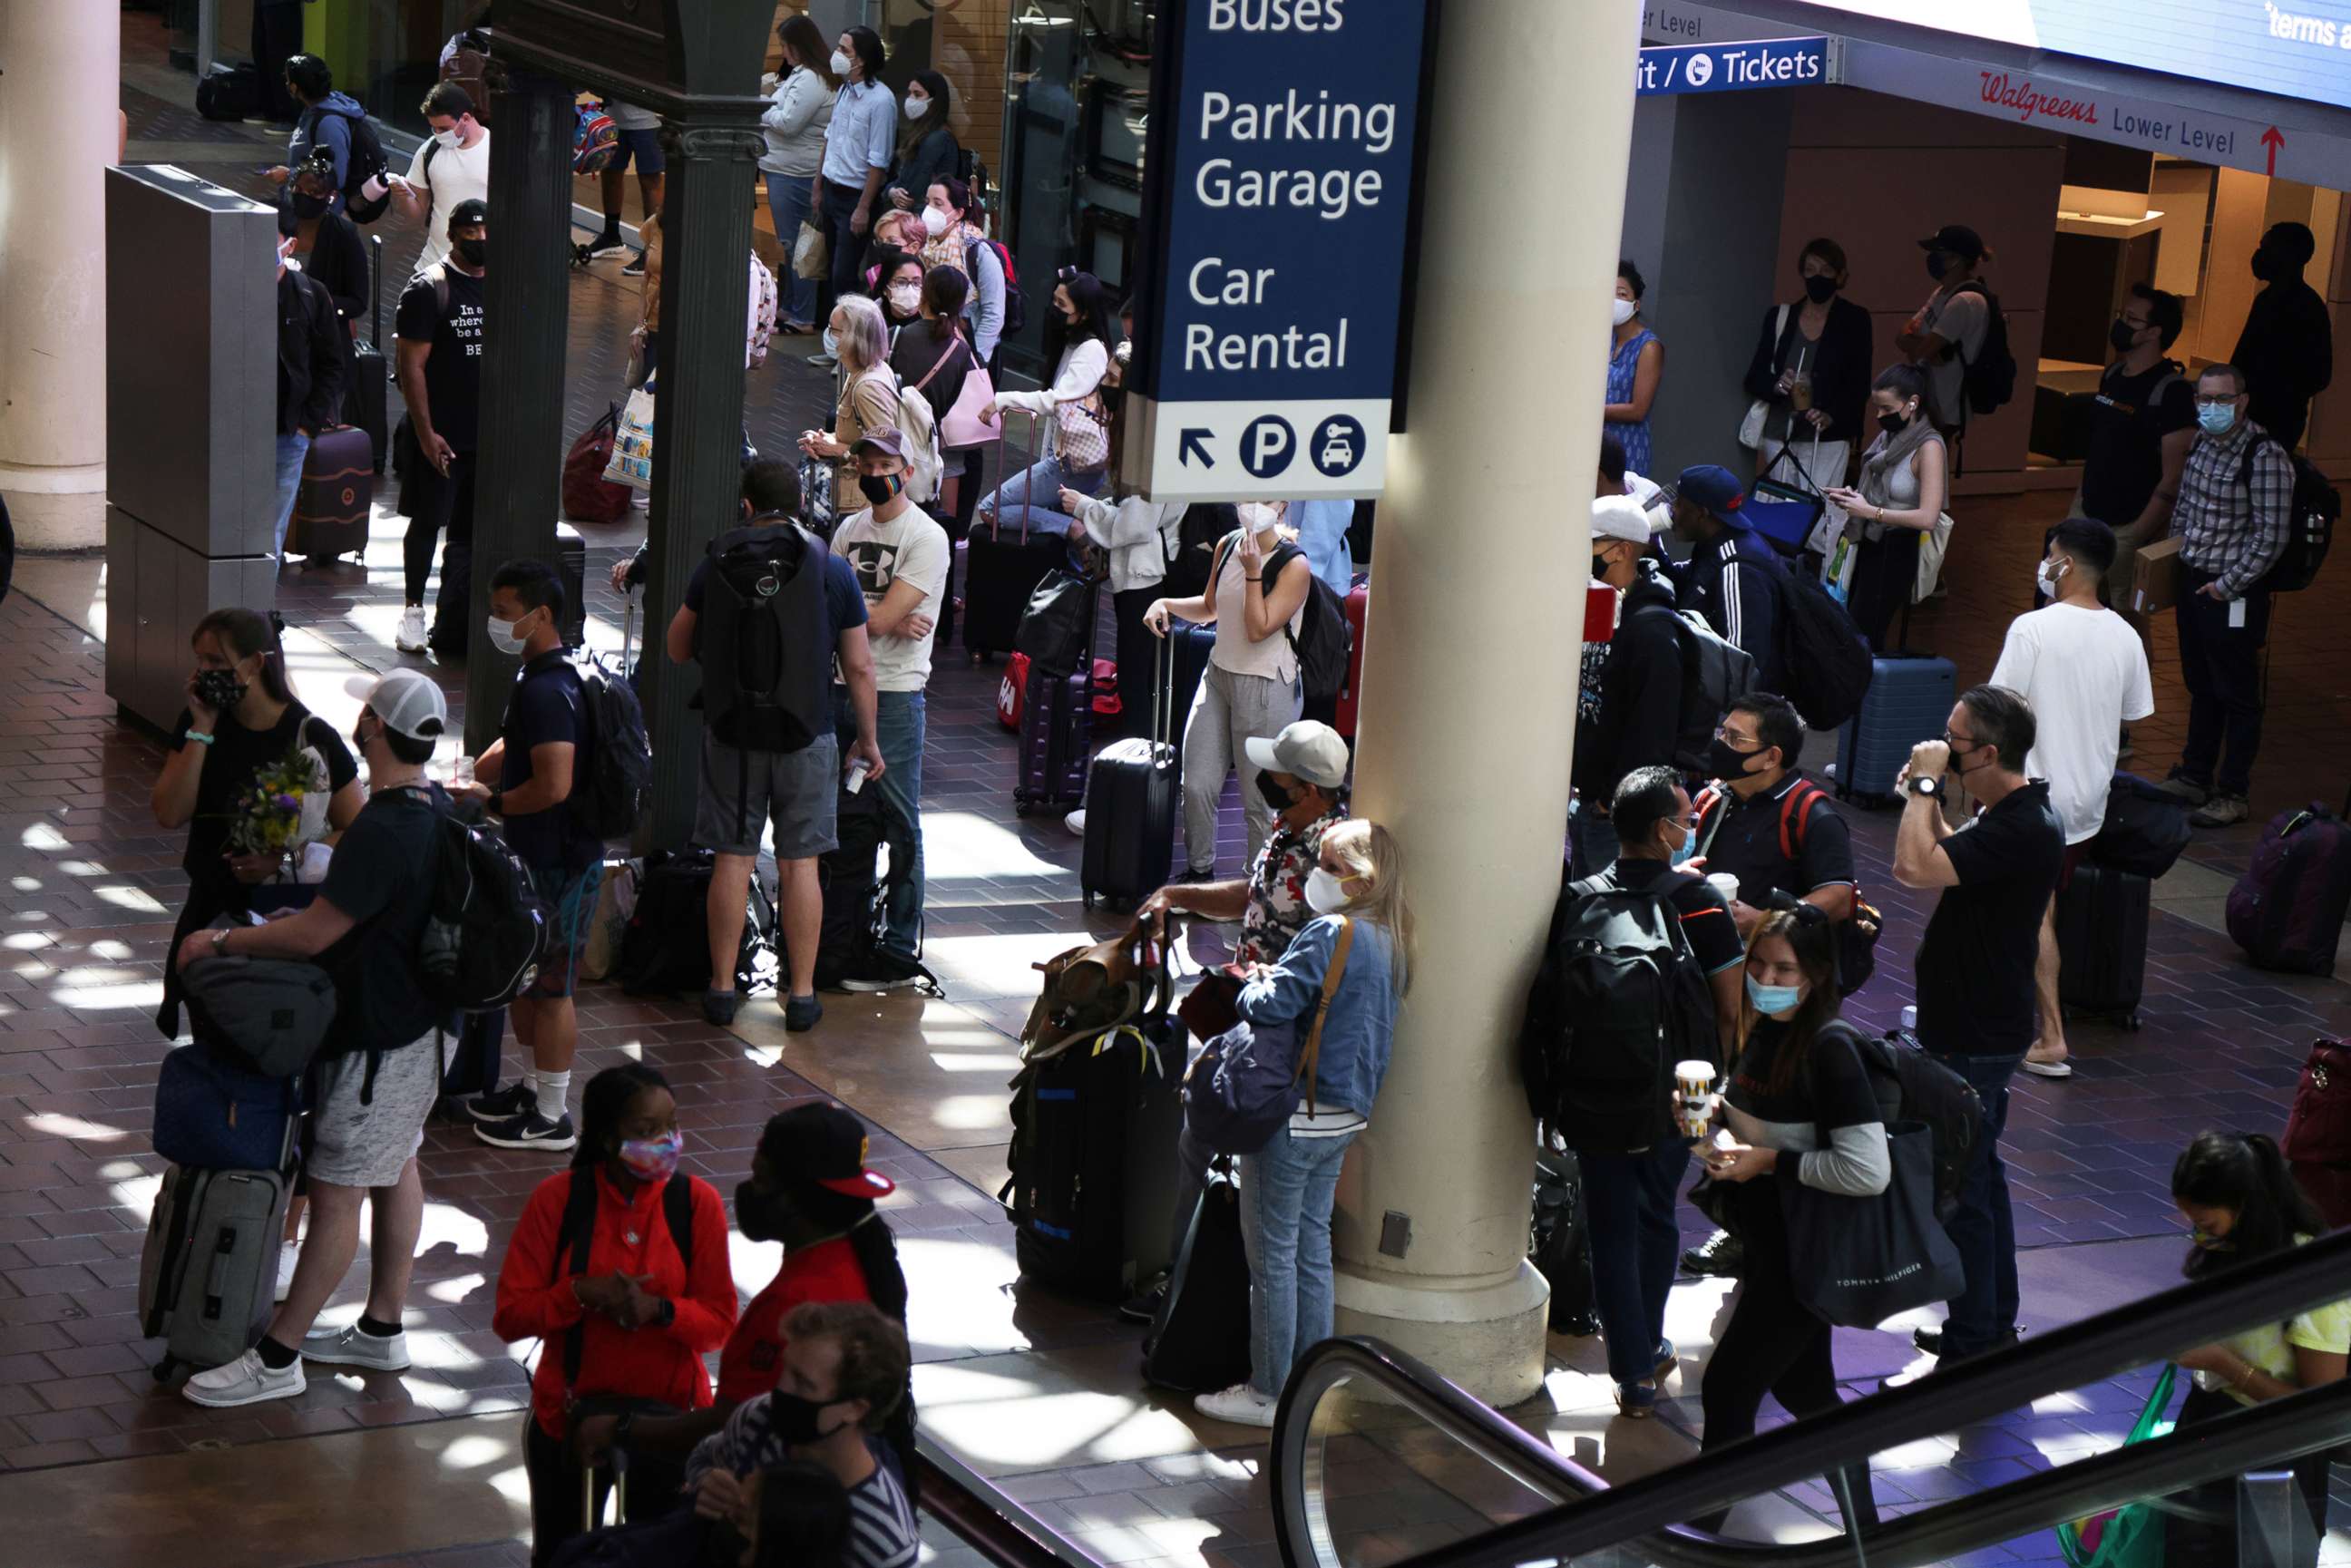 PHOTO: Passengers wait at the concourse of Union Station, Sept. 3, 2021, in Washington, D.C.